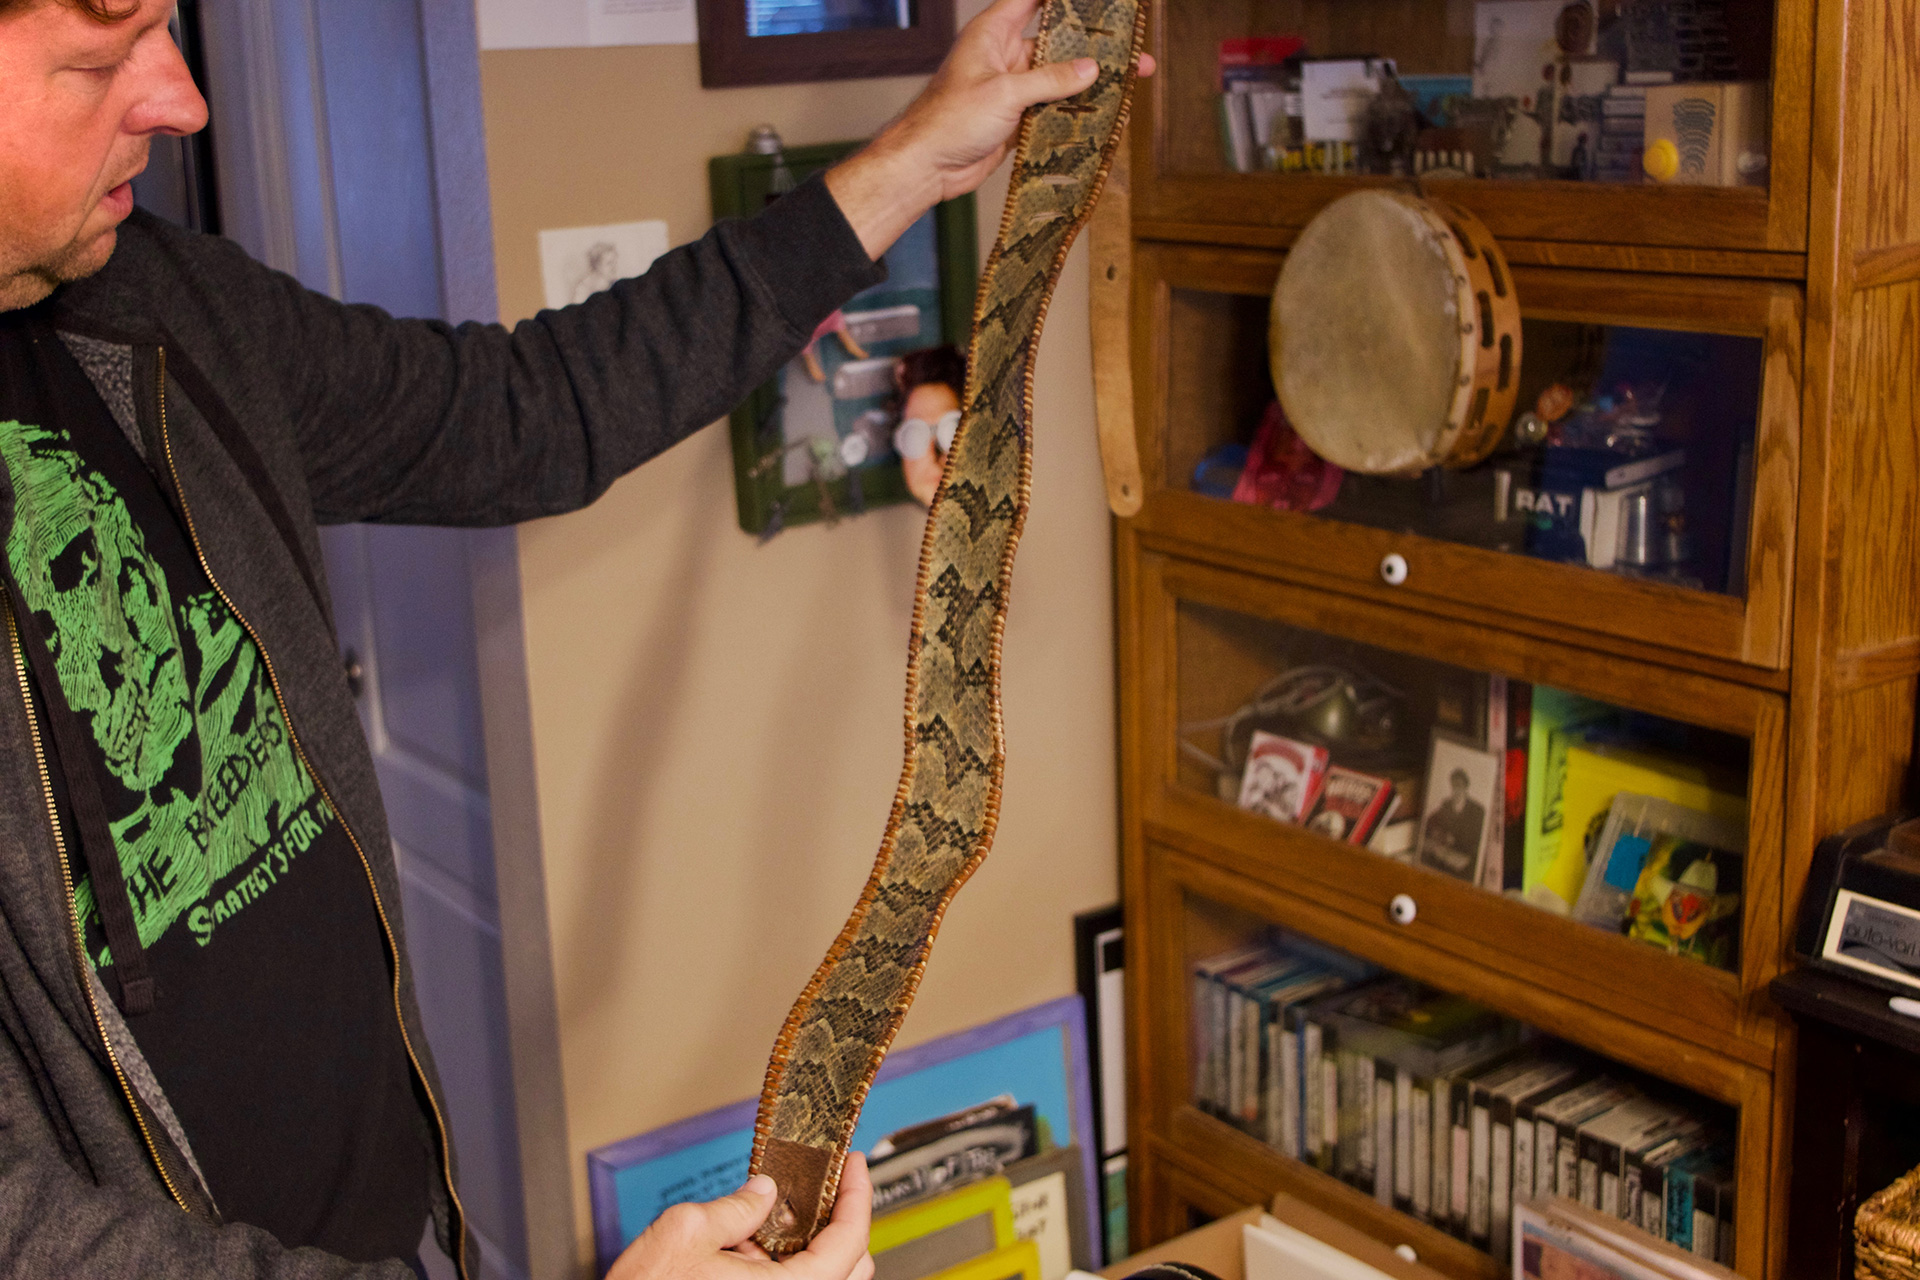 Abe with a guitar strap made from the skin of Old Lemonhead, a prized rattlesnake from the Coots family's church (photograph by Eli Bartlett)